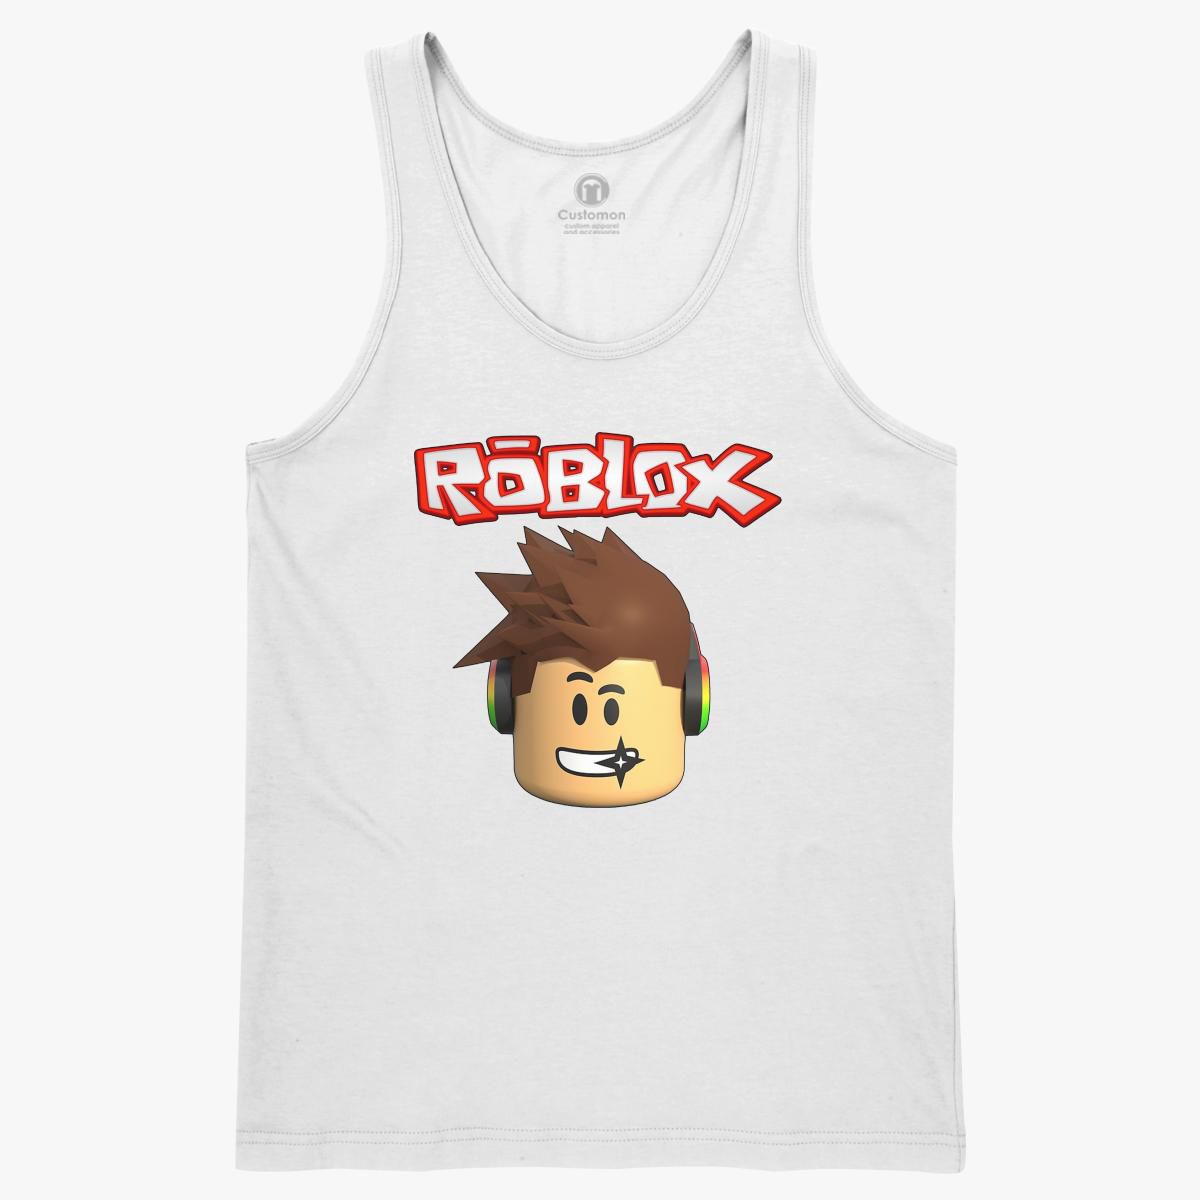 W H I T E T A N K T O P R O B L O X M E N Zonealarm Results - red tank top roblox